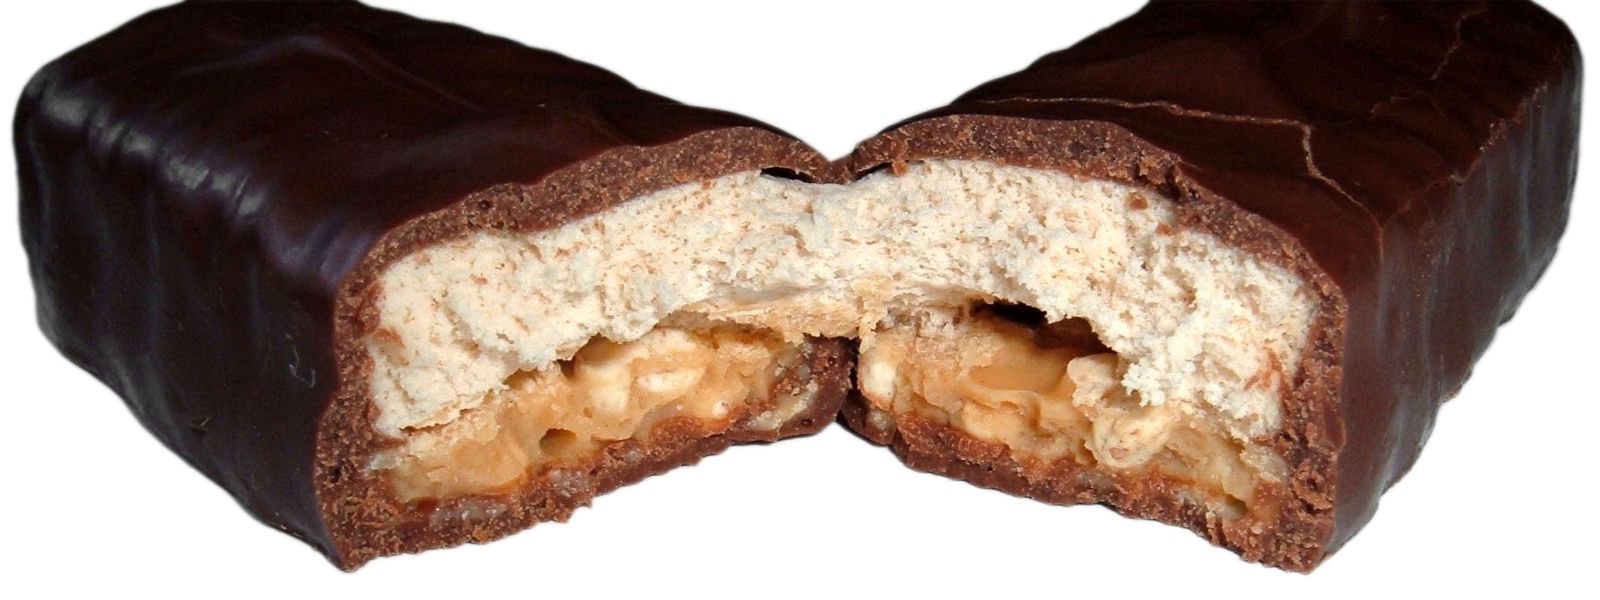 Hershey's s'mores bar